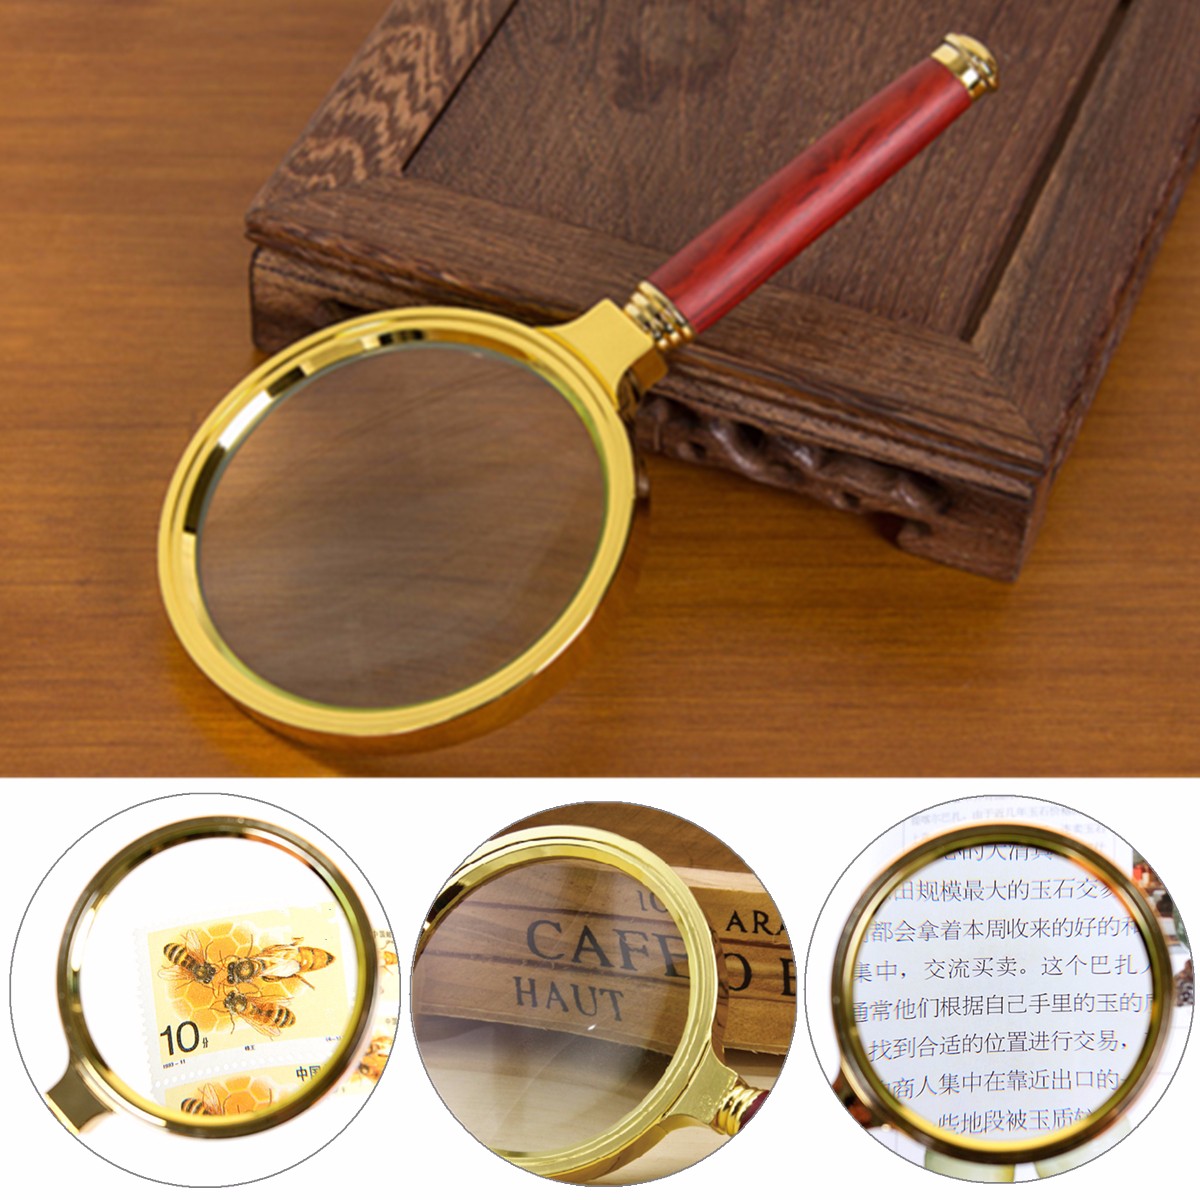 70mm-10X-Handheld-Magnifier-Magnifying-Glass-Loupe-Lens-for-Easy-Reading-Jewelry-1046079-1